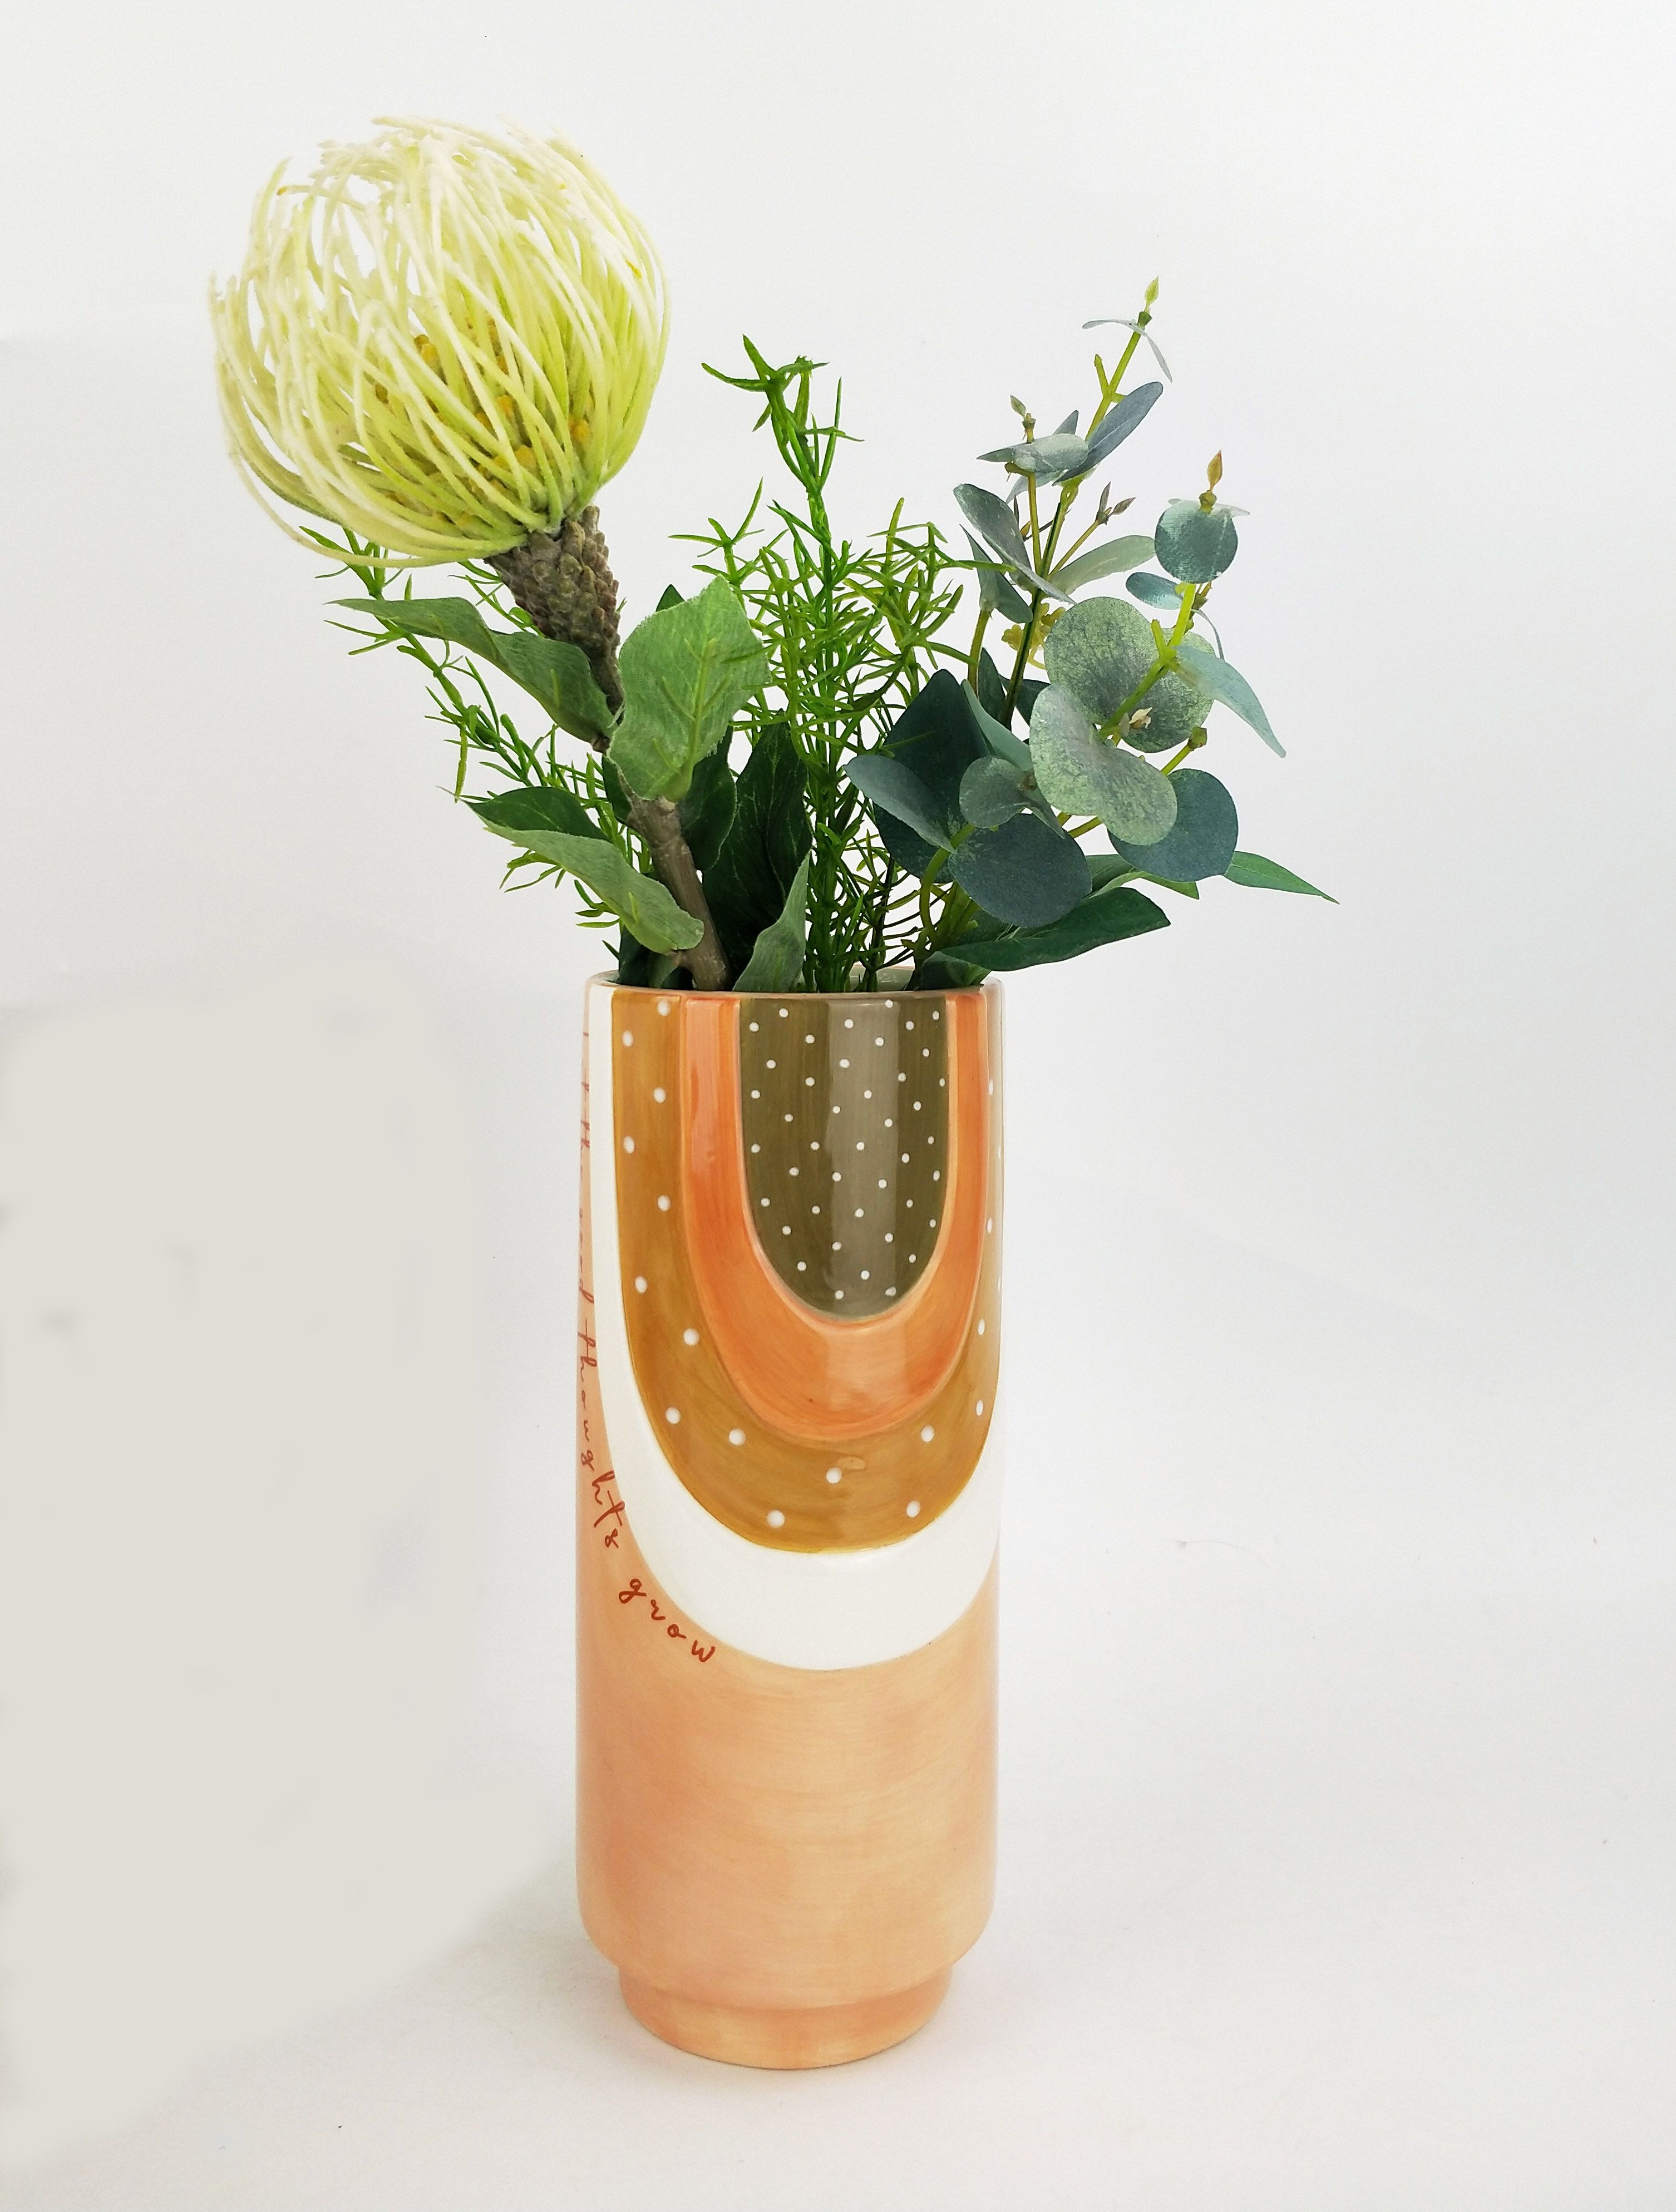 Let The Good Thoughts Grow Vase